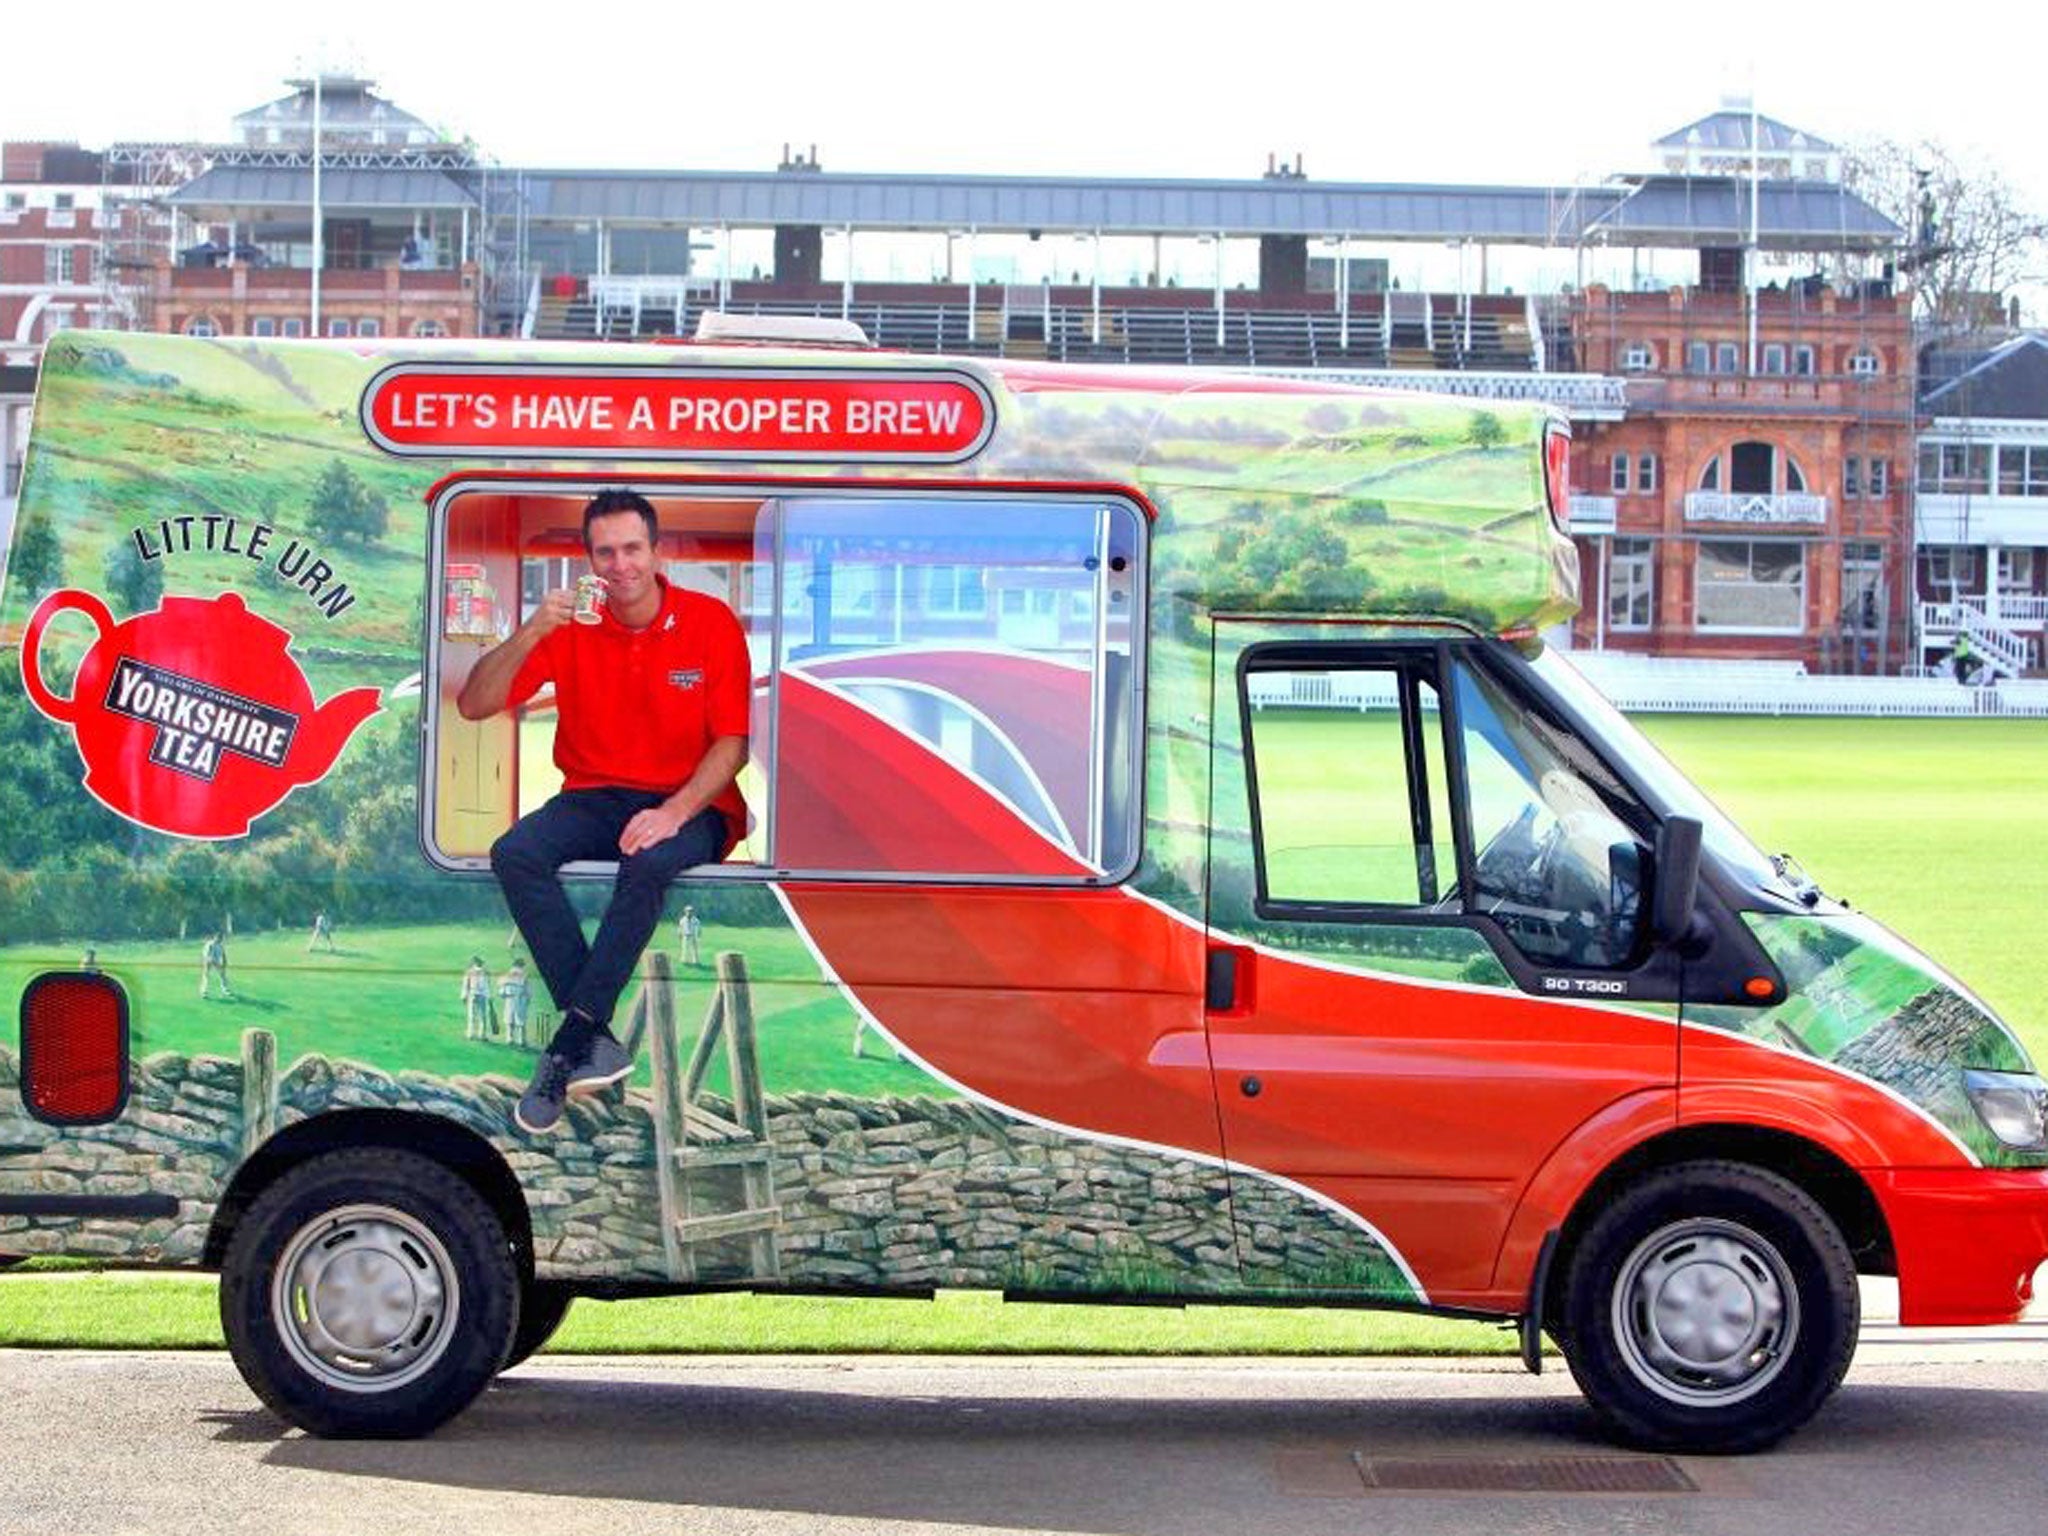 The former England captain Michael Vaughan launches Yorkshire
Tea’s deal at Lord’s yesterday